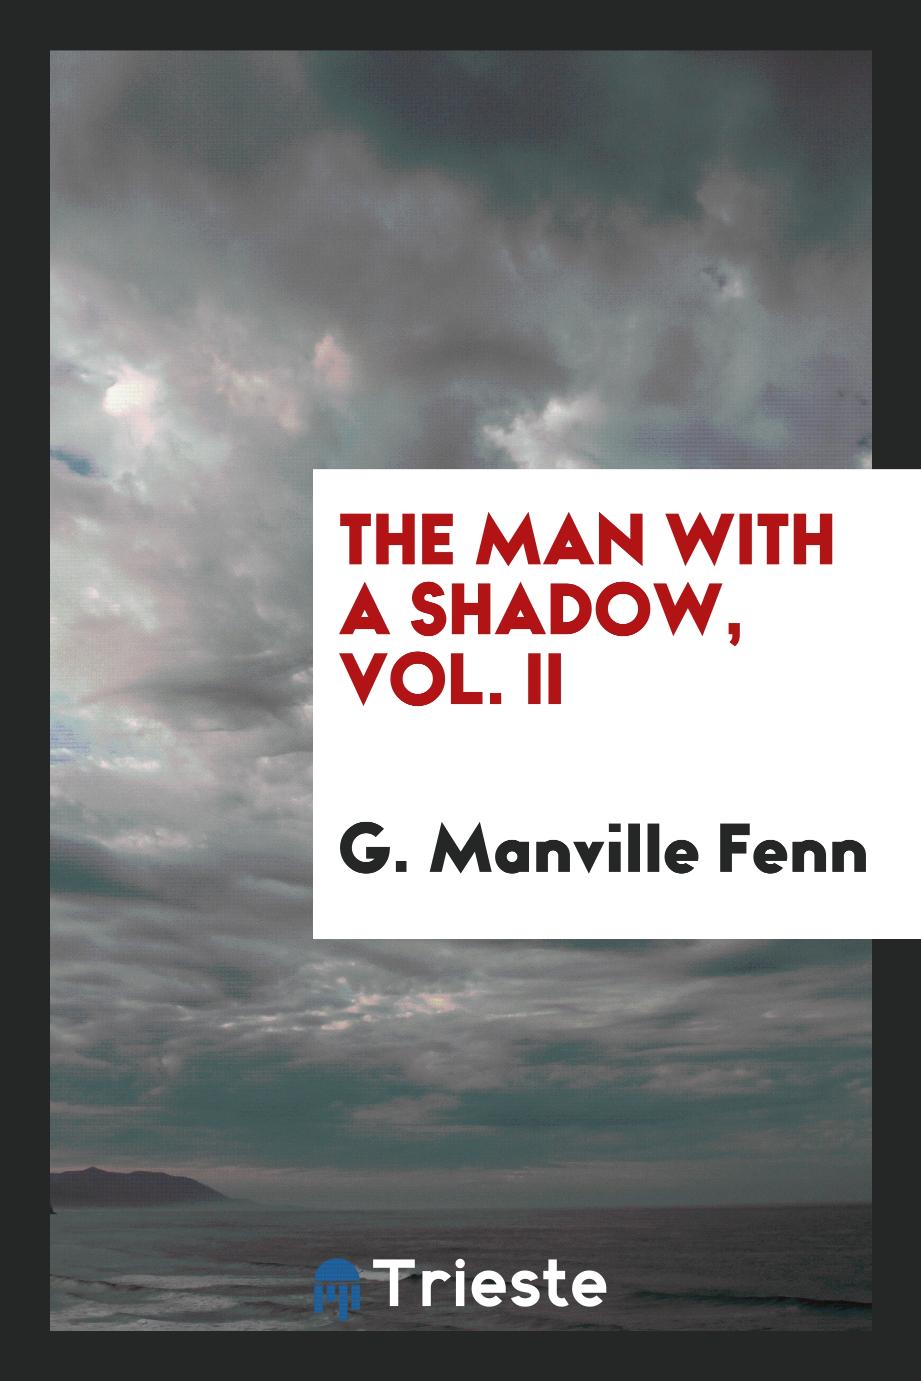 The man with a shadow, Vol. II